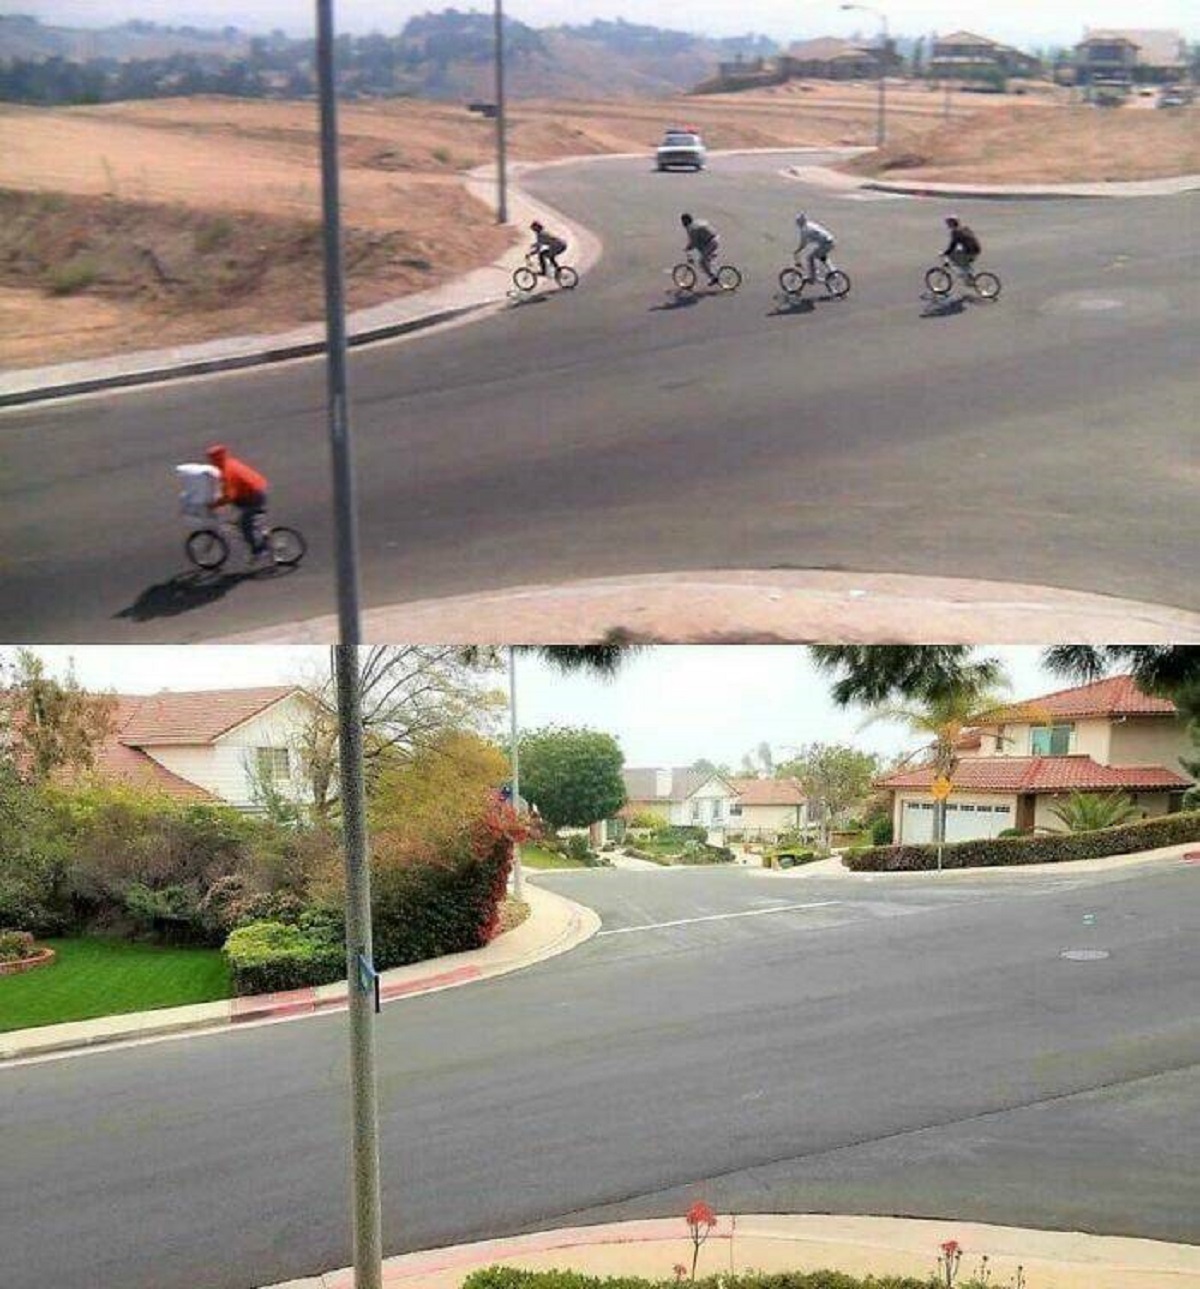 "Intersection Of Beaufait And Darby Avenues, Porter Ranch, San Fernando Valley, Los Angeles - From A Scene In “E.t.” In 1982 And In 2022"